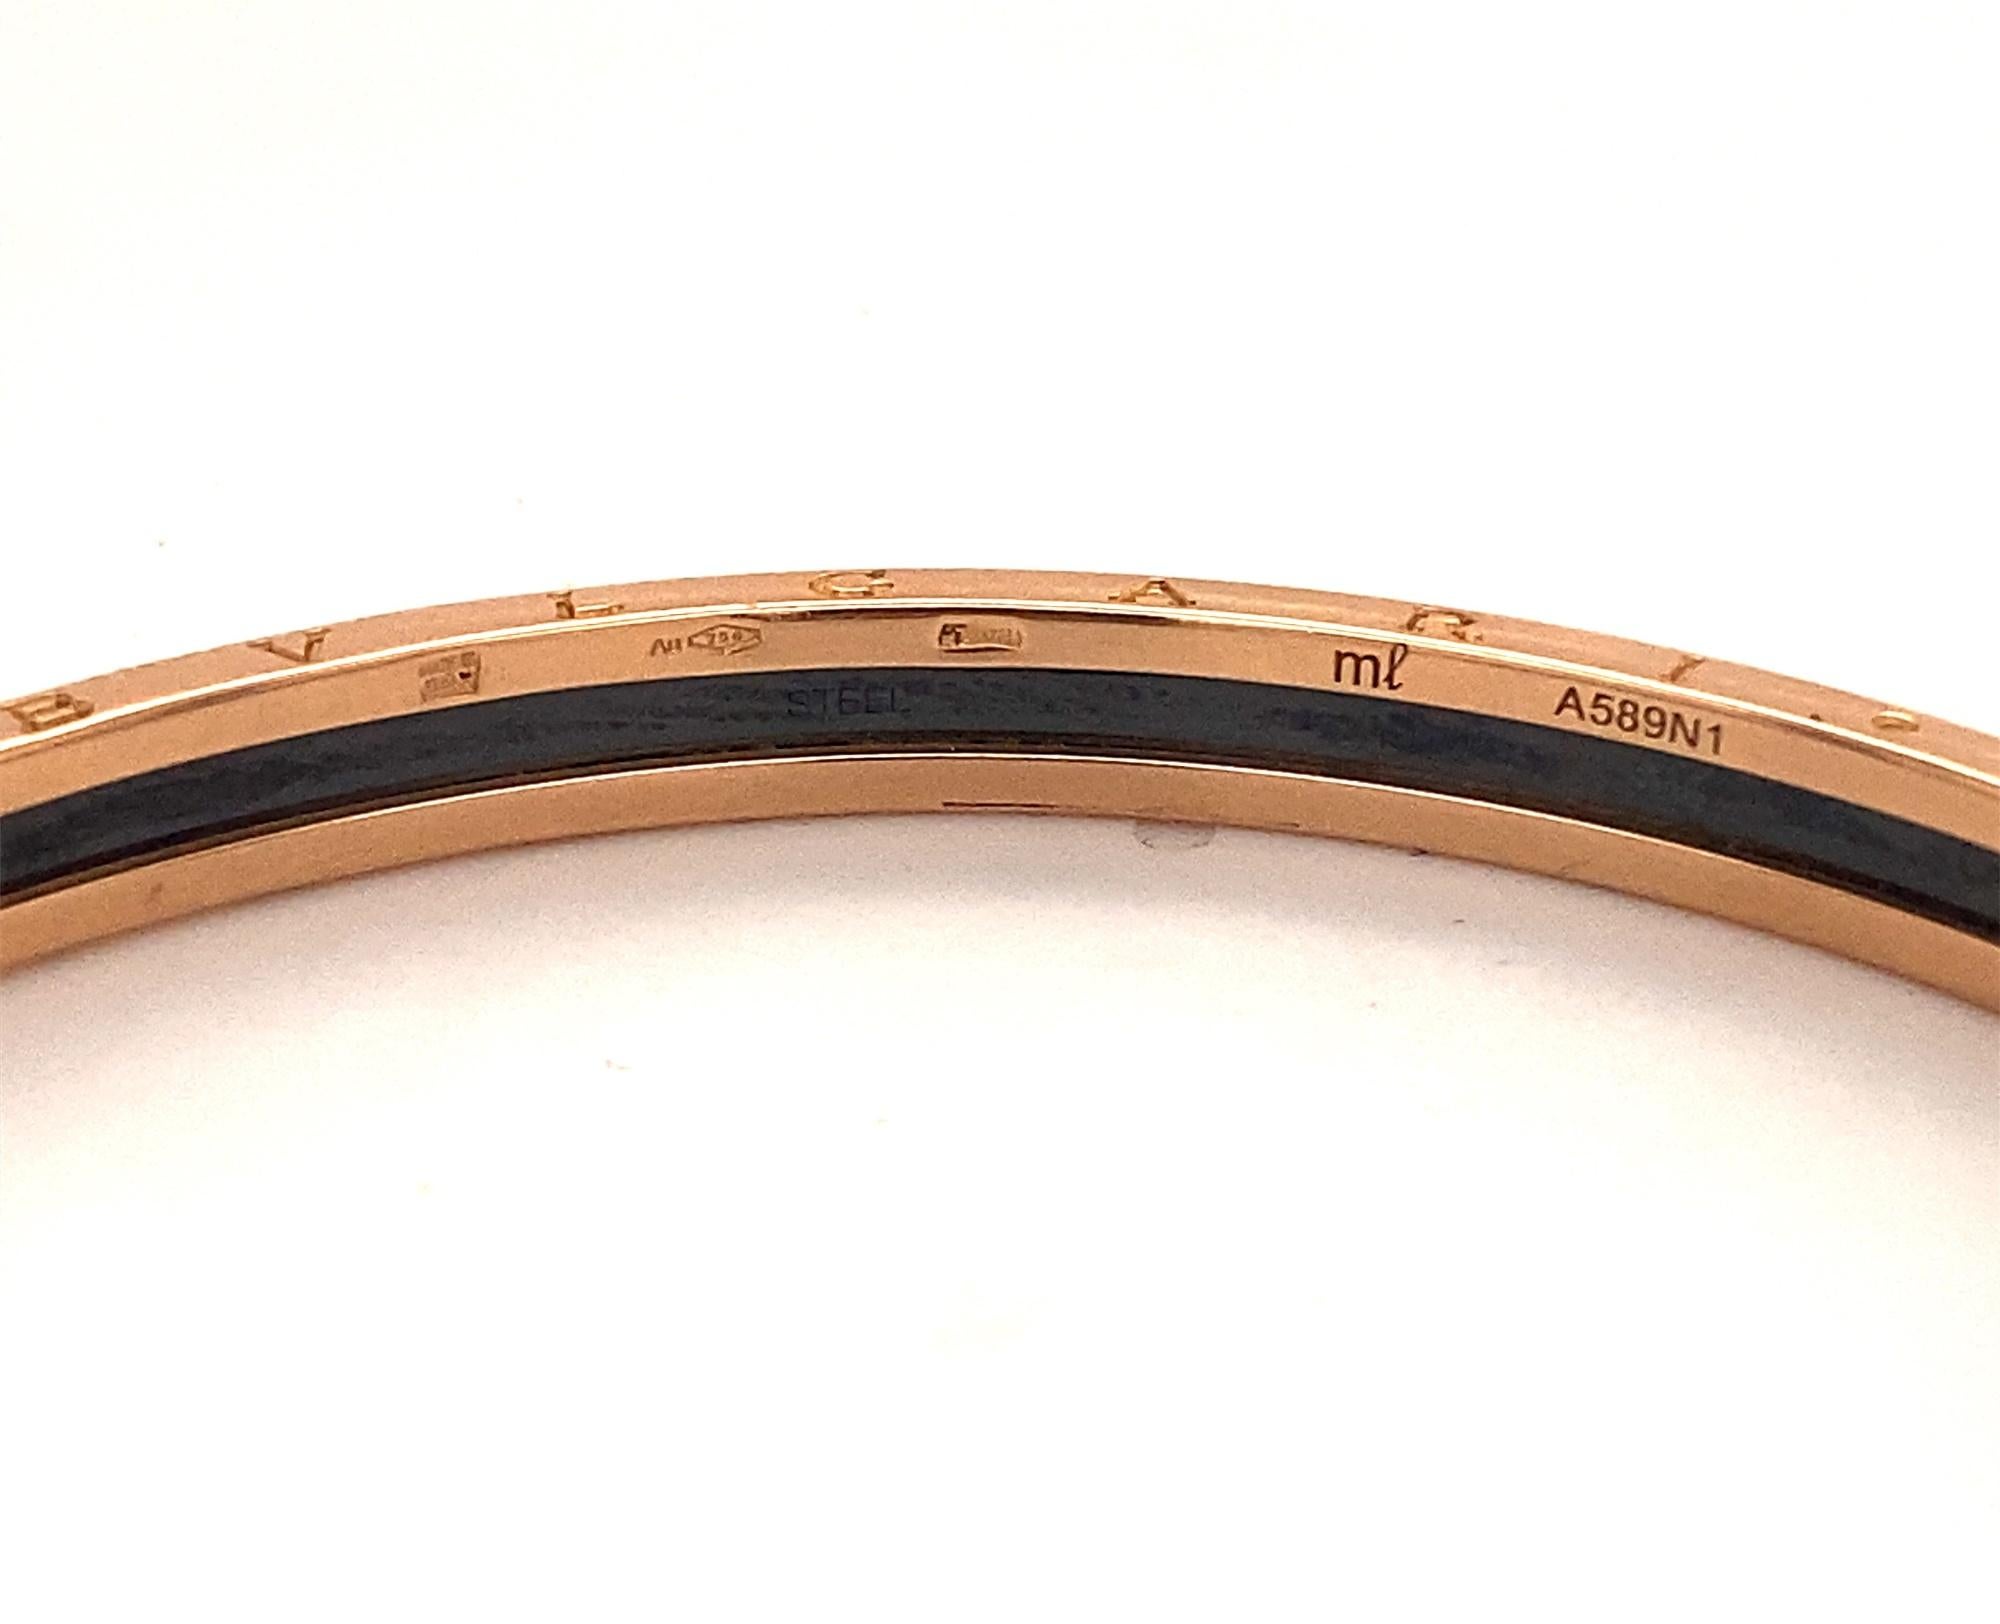 Bvlgari B-Zero1 18K Rose Gold and Stainless Steel Bangle In Excellent Condition For Sale In Woodland Hills, CA